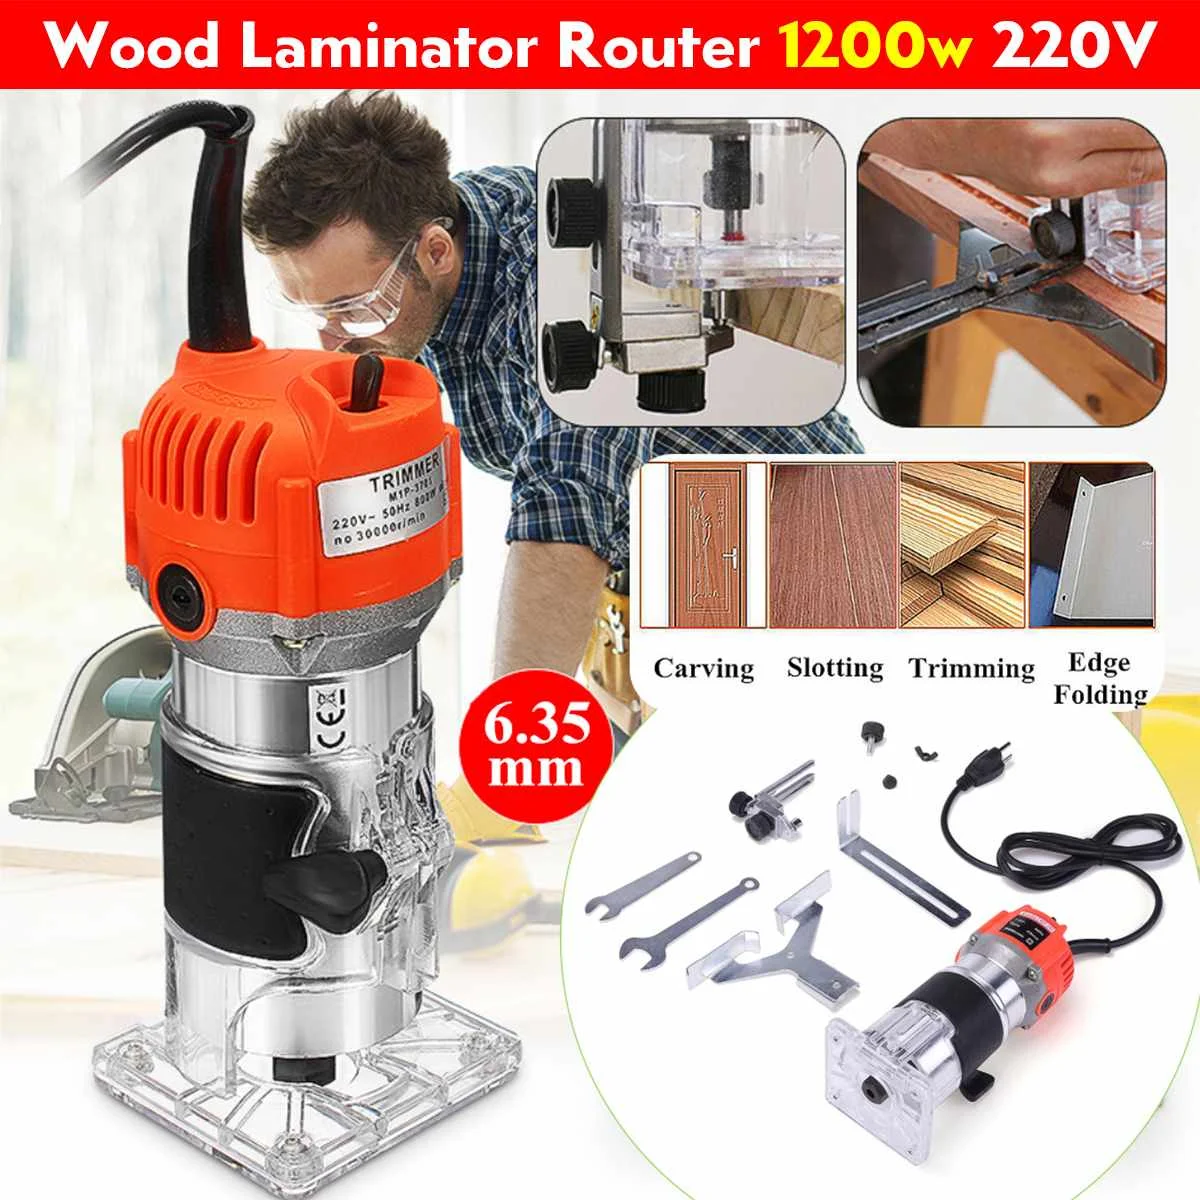 

1200W 220V Electric Wood Trimmer Laminator 35000r/min Router Joiners Tool Set Aluminum+Plastic 6.35mm Collet Diameter Waterproof